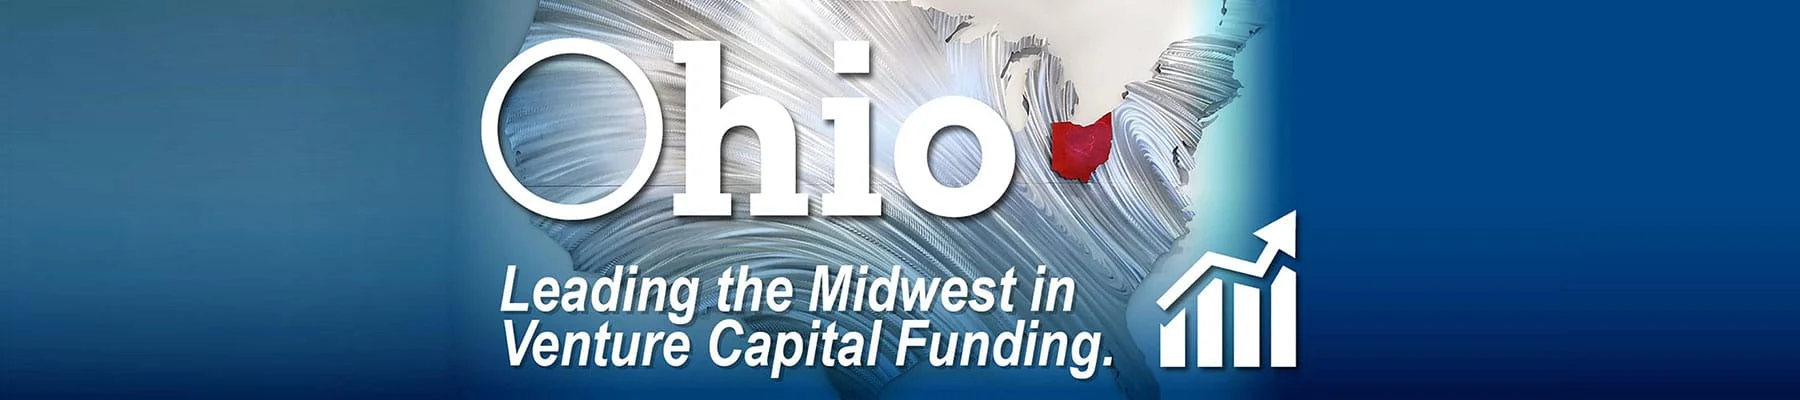 Ohio: Leading the Midwest in Venture Capital Funding